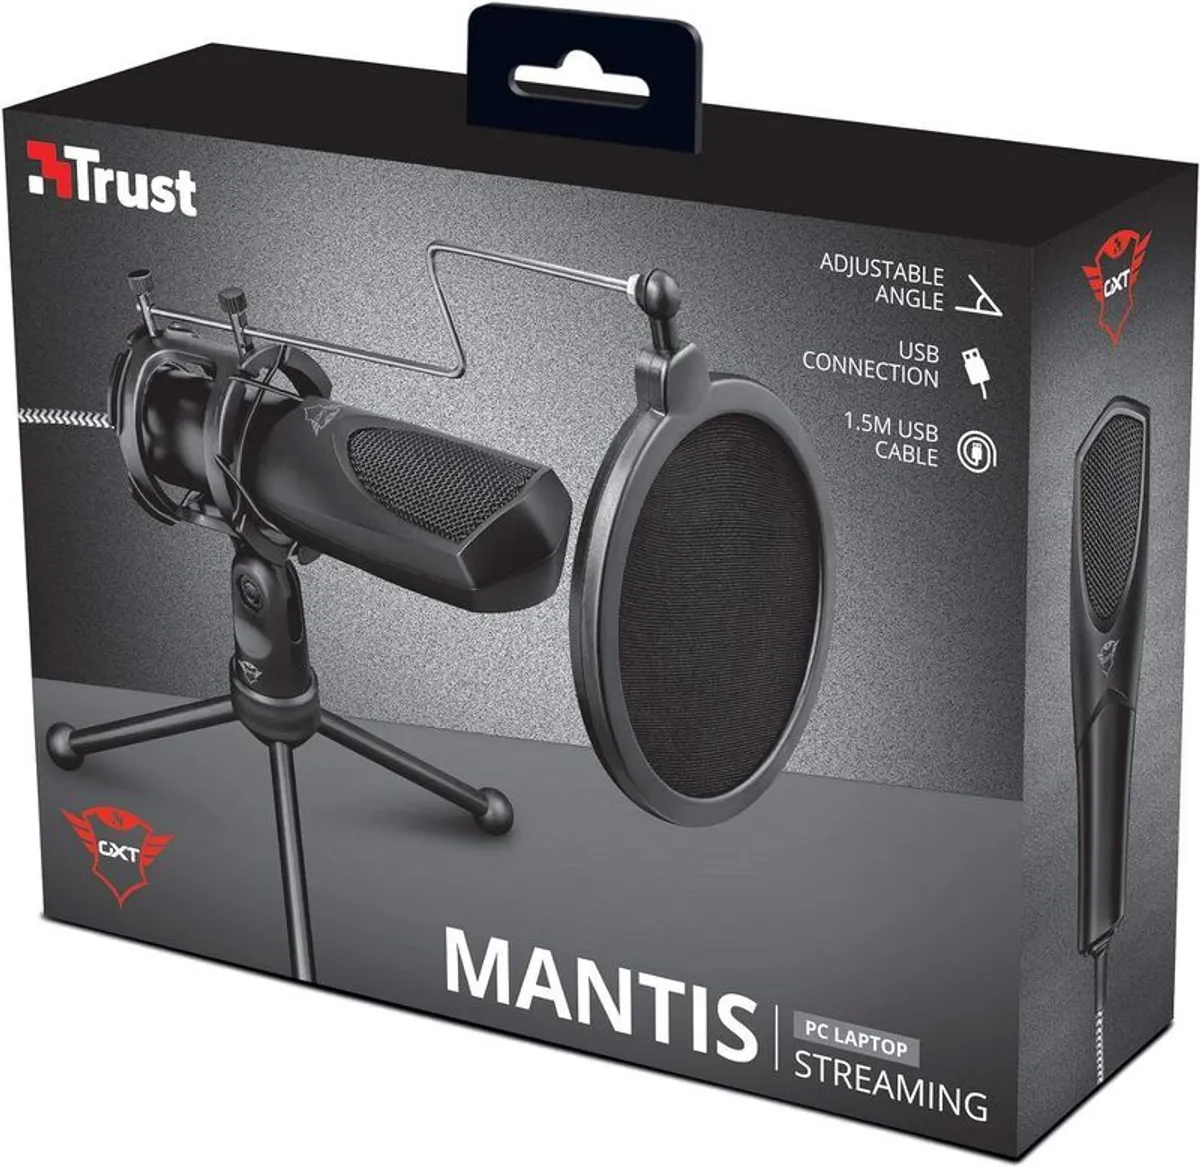 Trust Gaming GXT 232 Mantis Streaming Gaming Microphone for PC, PS4 and PS5, USB Connected, Including Shock Mount, Pop Filter and Tripod Stand, Black